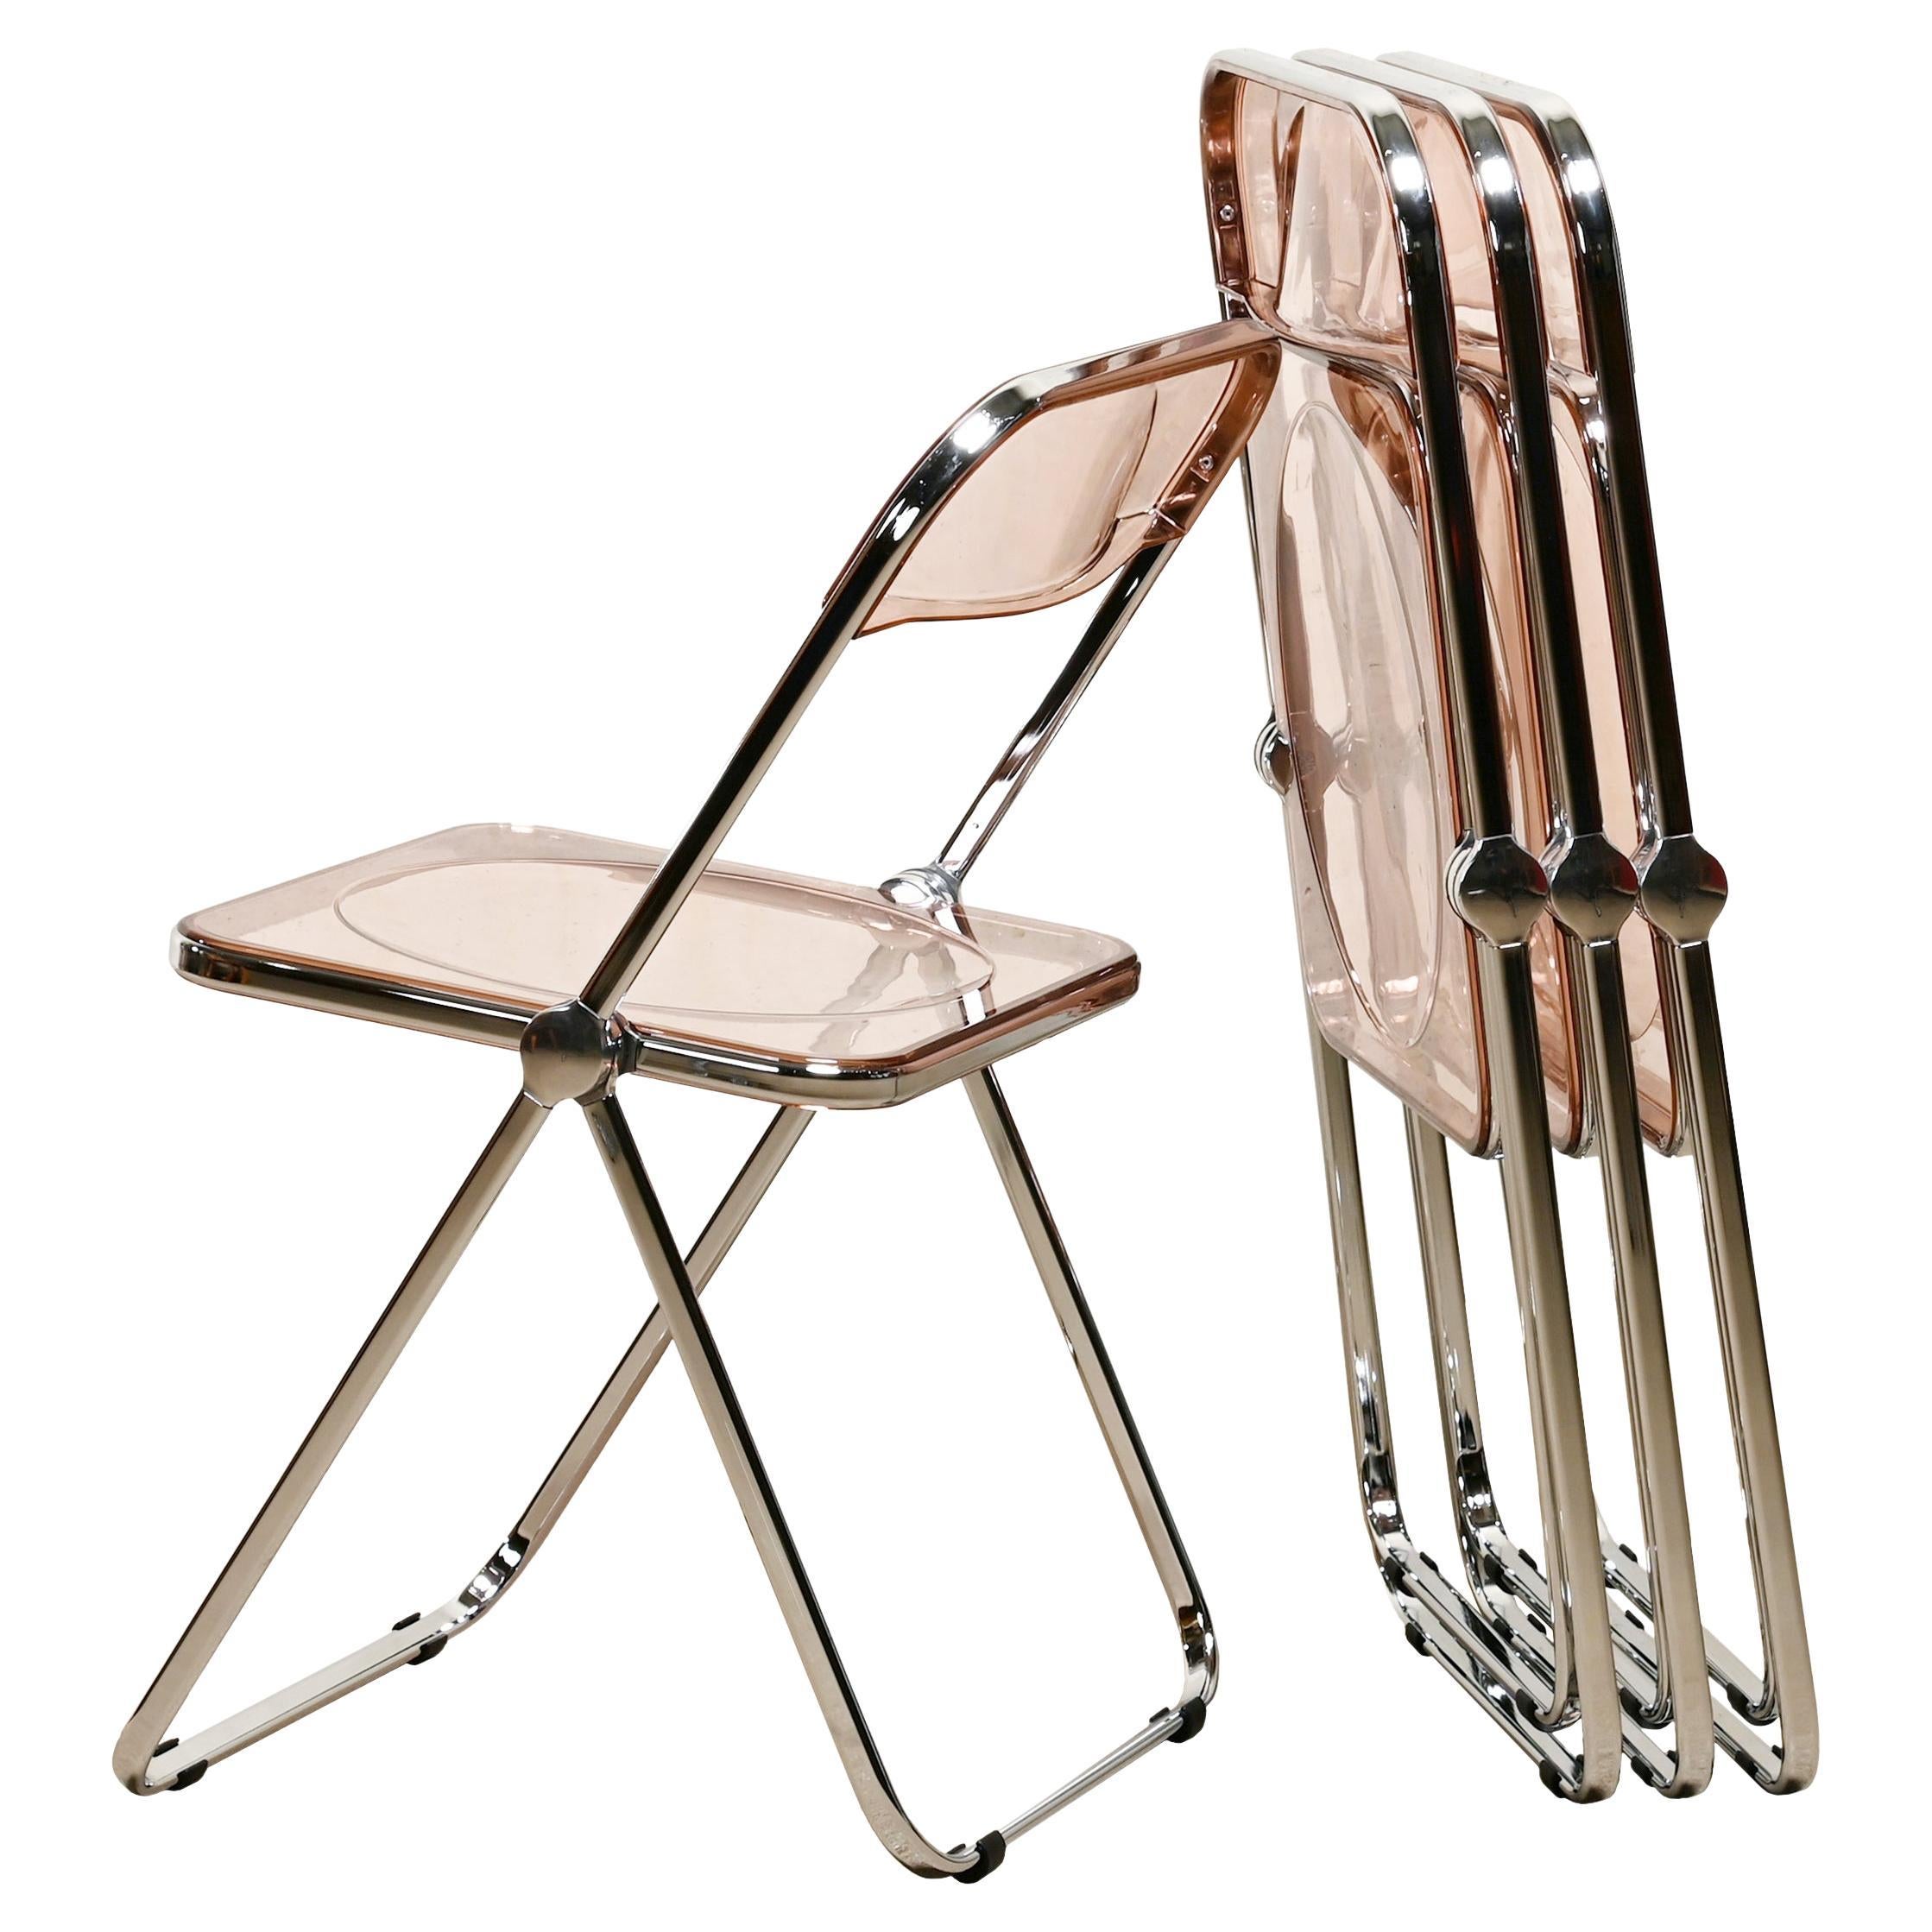 Giancarlo Piretti Plia Set Folding Chairs in Lucite Pink and Chrome for Castelli For Sale